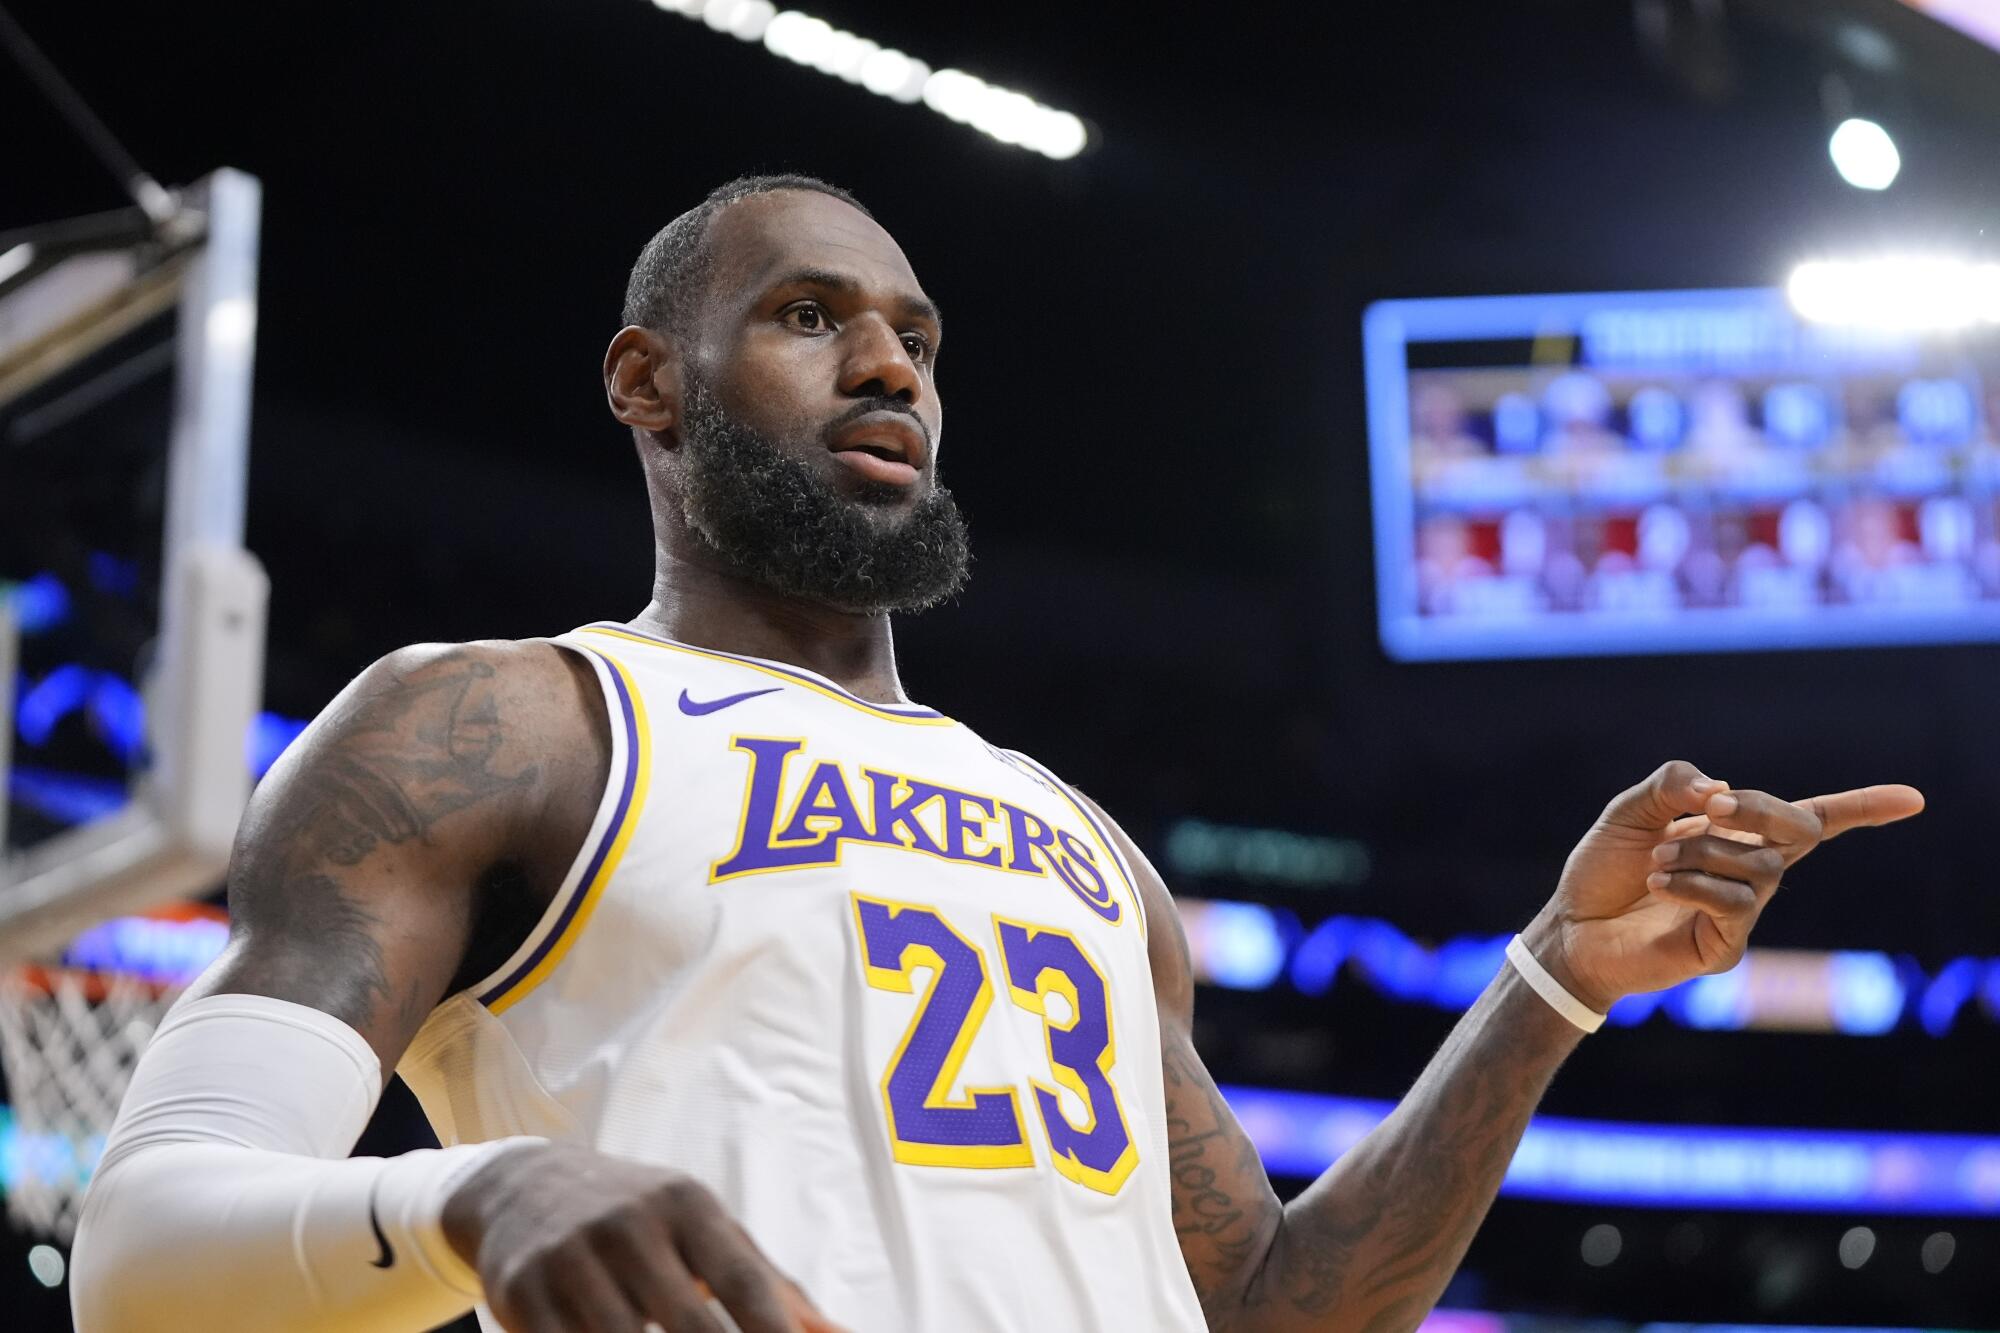 Lakers forward LeBron James gestures after scoring against the Trail Blazers on Jan. 21.